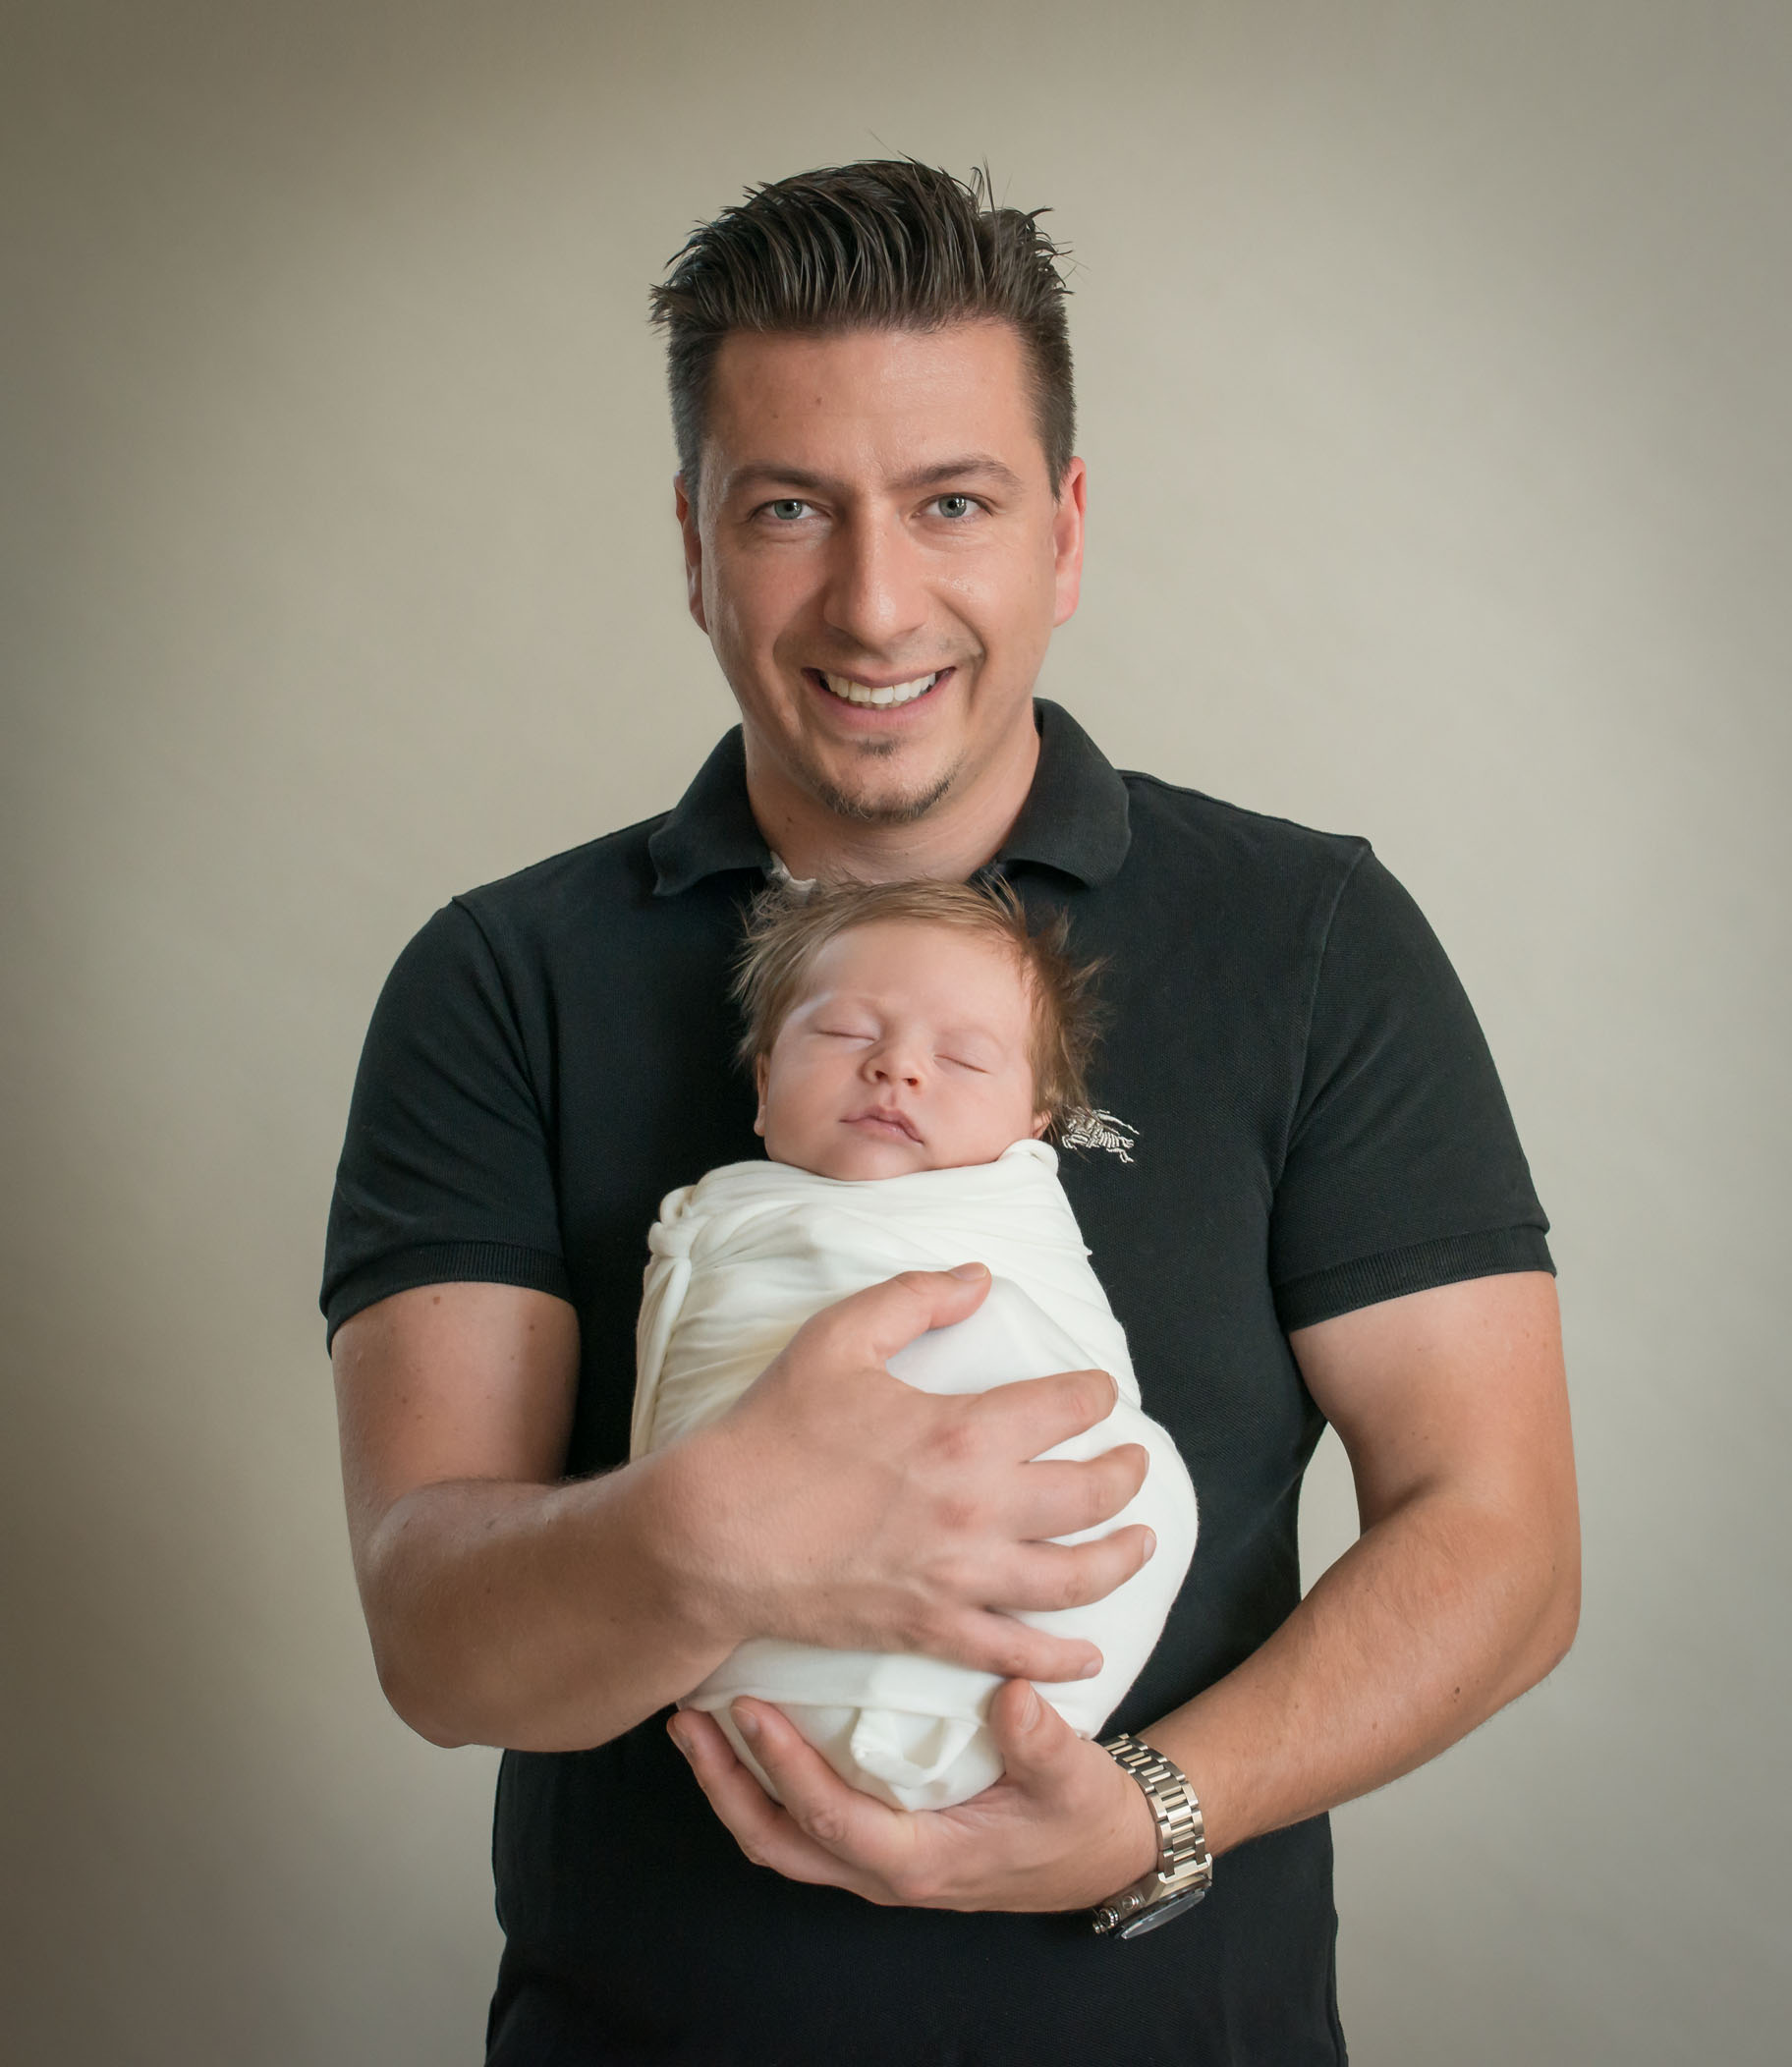 Dad smiling and holding wrapped newborn son against his chest